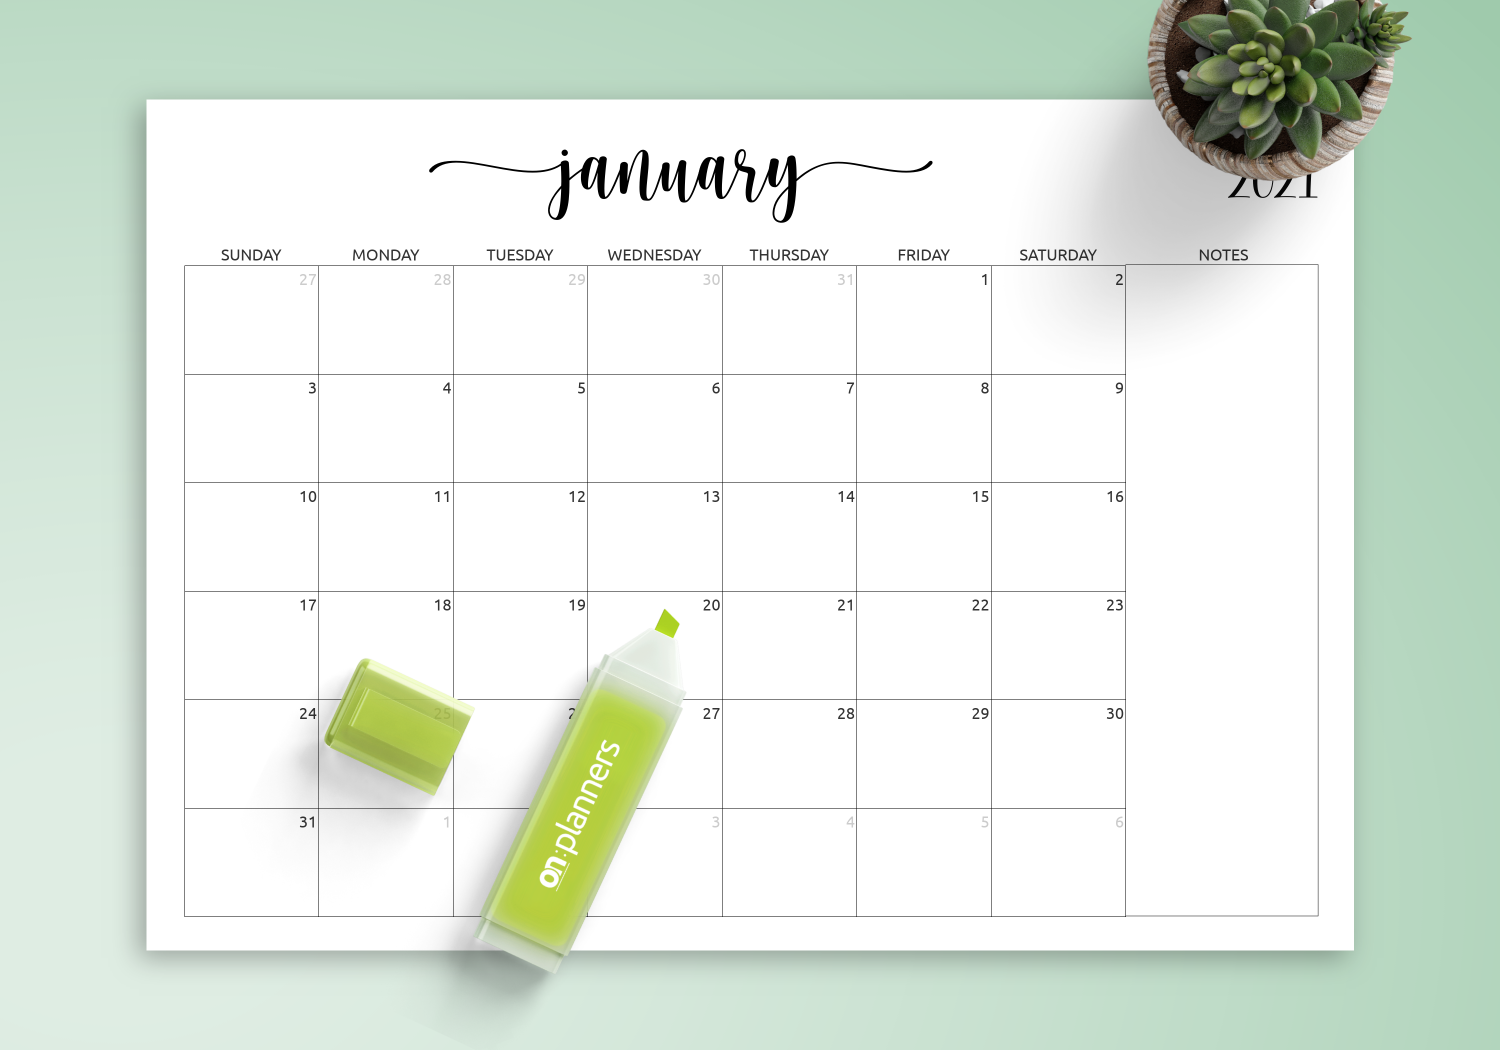 printable blank monthly calendar with notes free by 123freevectors on - monthly calendars to print colorful | free printable calendar templates with notes